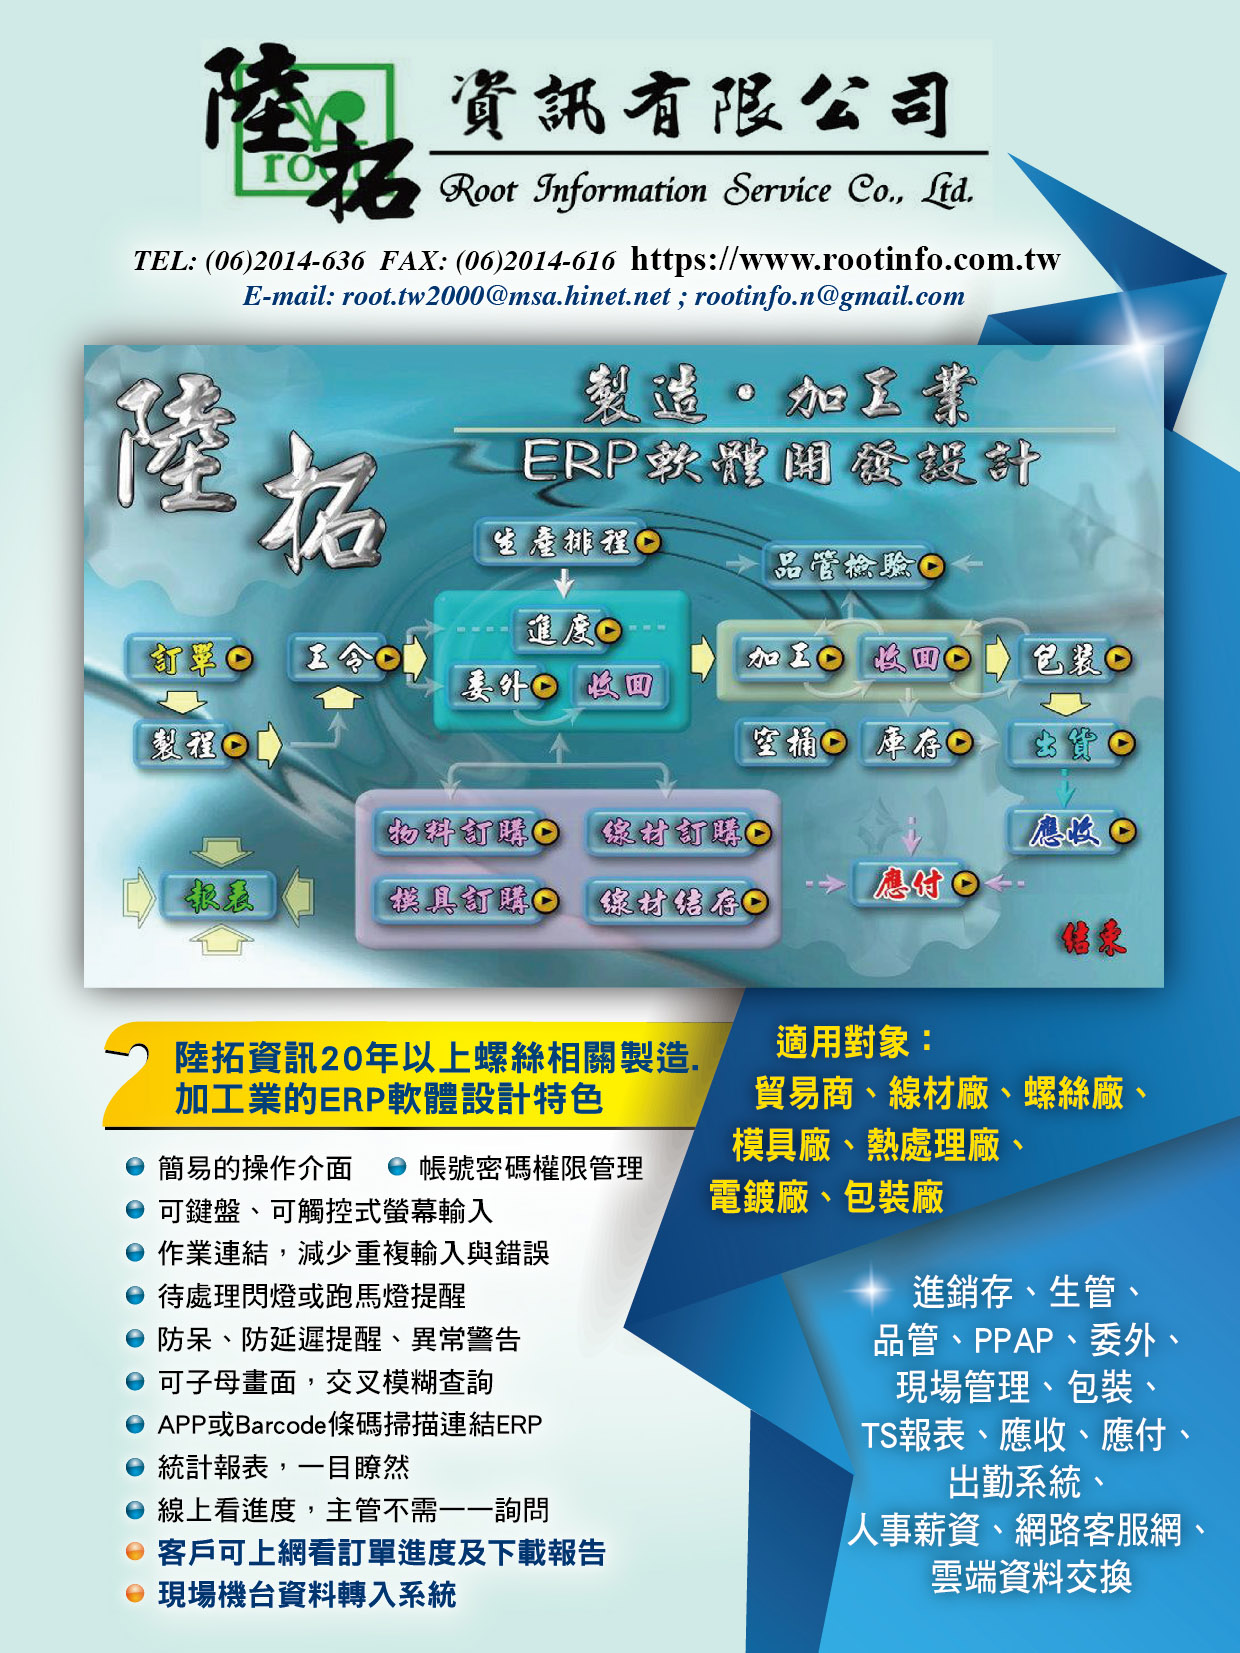 Root  Information Service Co., Ltd. Online Catalogues